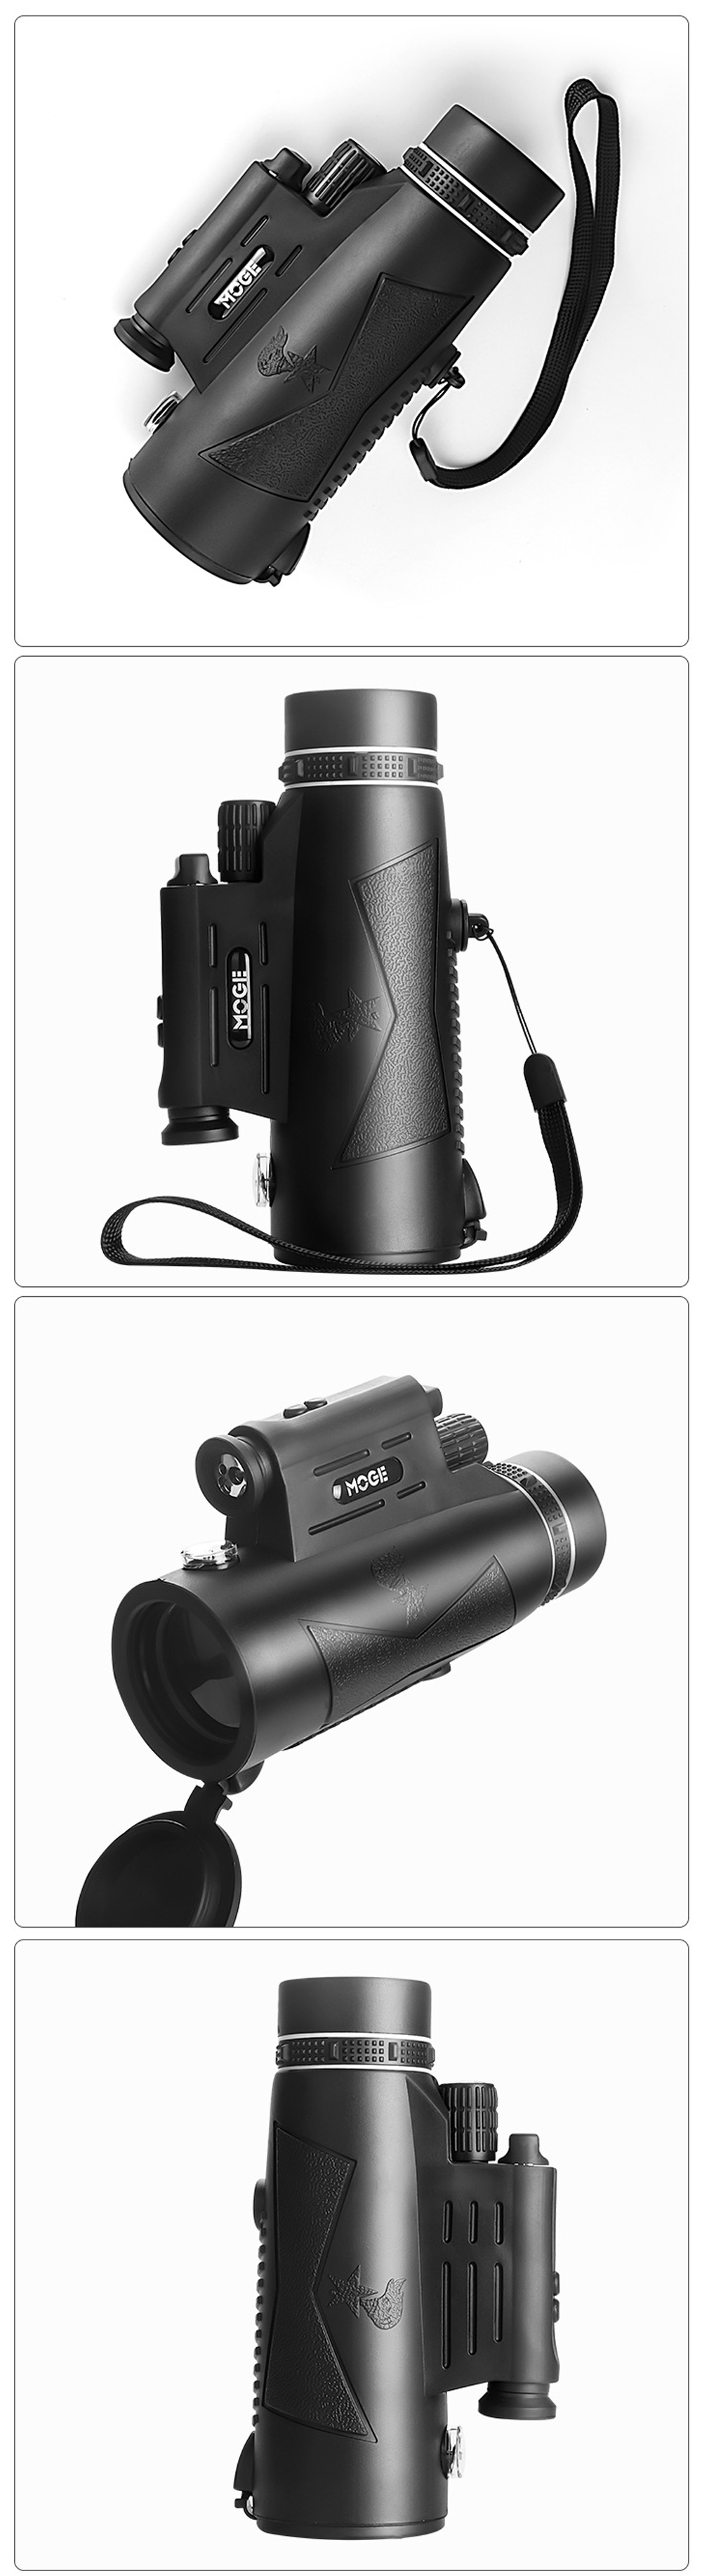 Moge-12X50-HD-Telescope-with-Laser-Flashlight-Phone-Adapter-Tripod-For-Outdoor-Camping-Travel-High-P-1838772-4